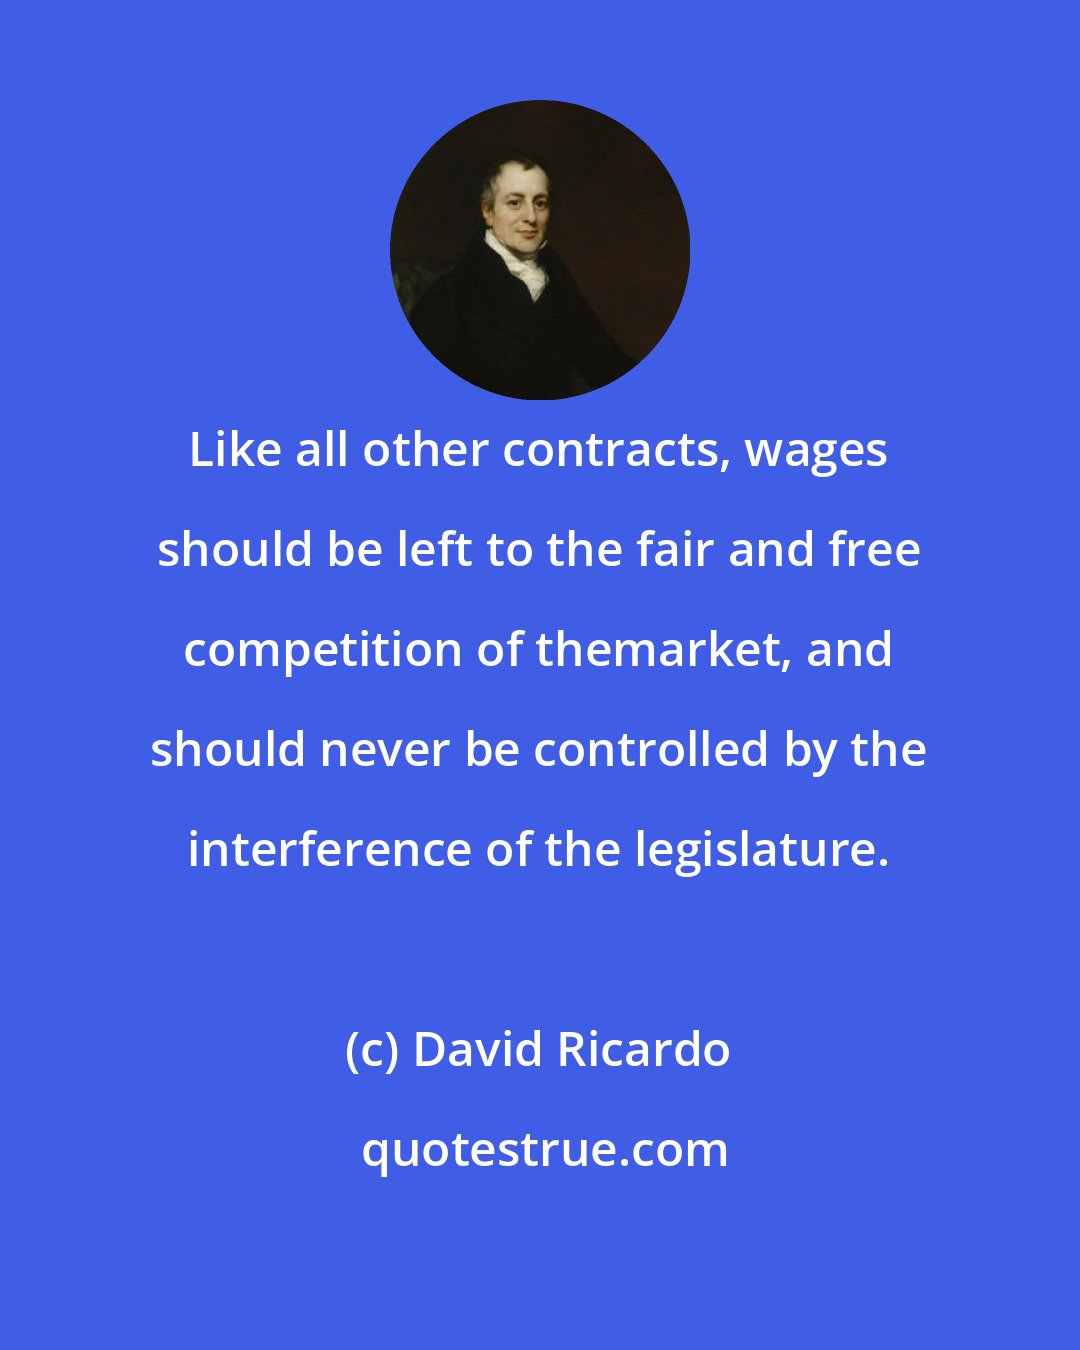 David Ricardo: Like all other contracts, wages should be left to the fair and free competition of themarket, and should never be controlled by the interference of the legislature.